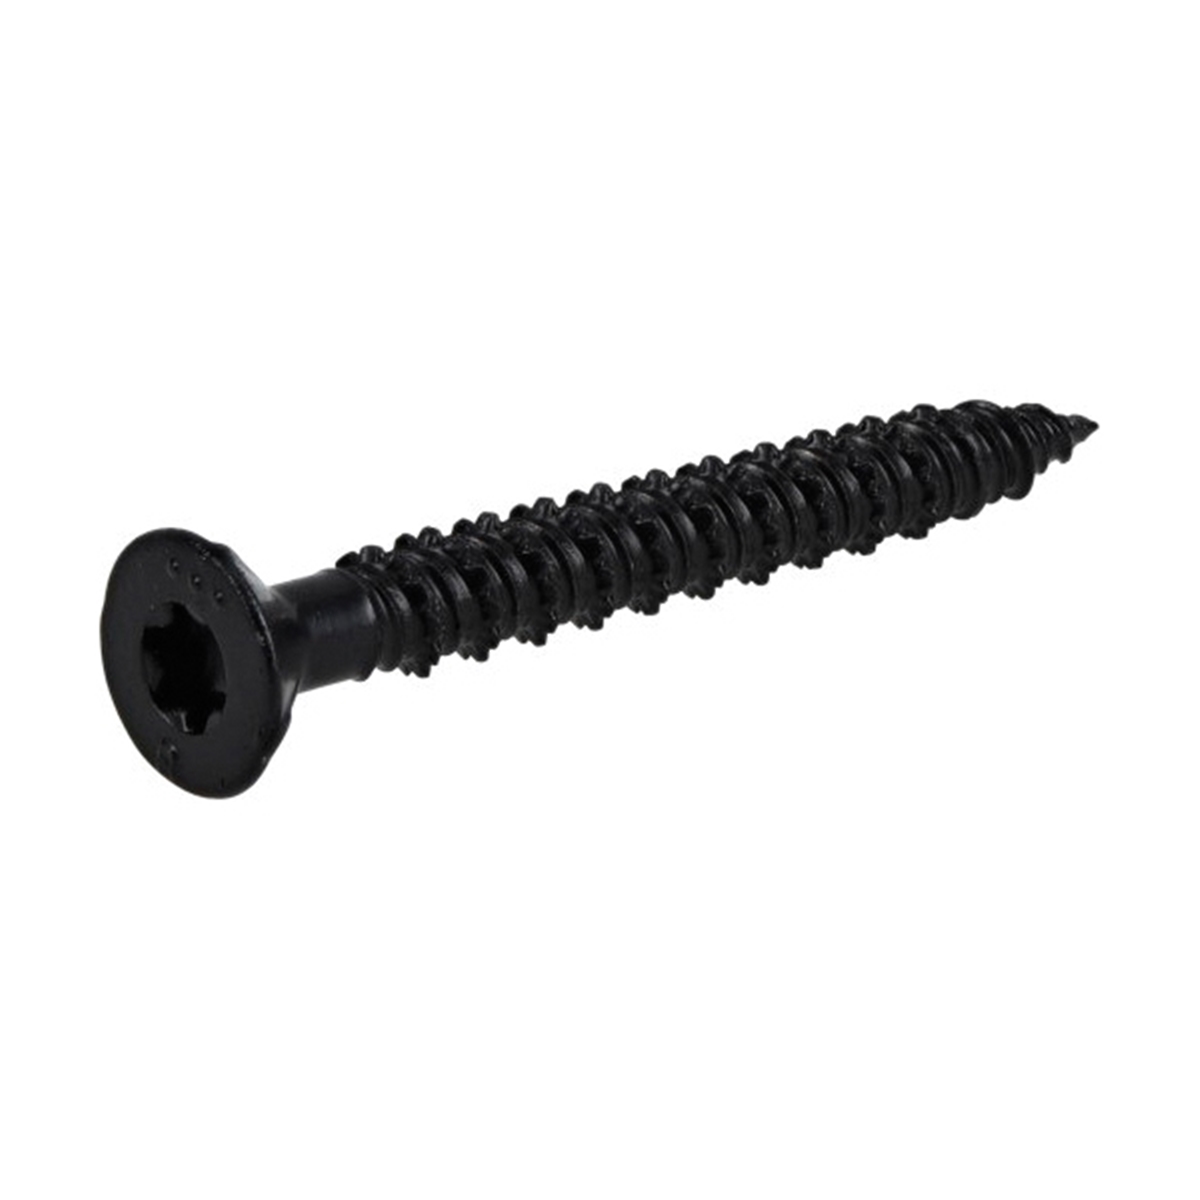 376607 Concrete Screw Anchor, 1/4 in Dia, 2-1/4 in L, Carbon Steel, Epoxy-Coated, 100/PK